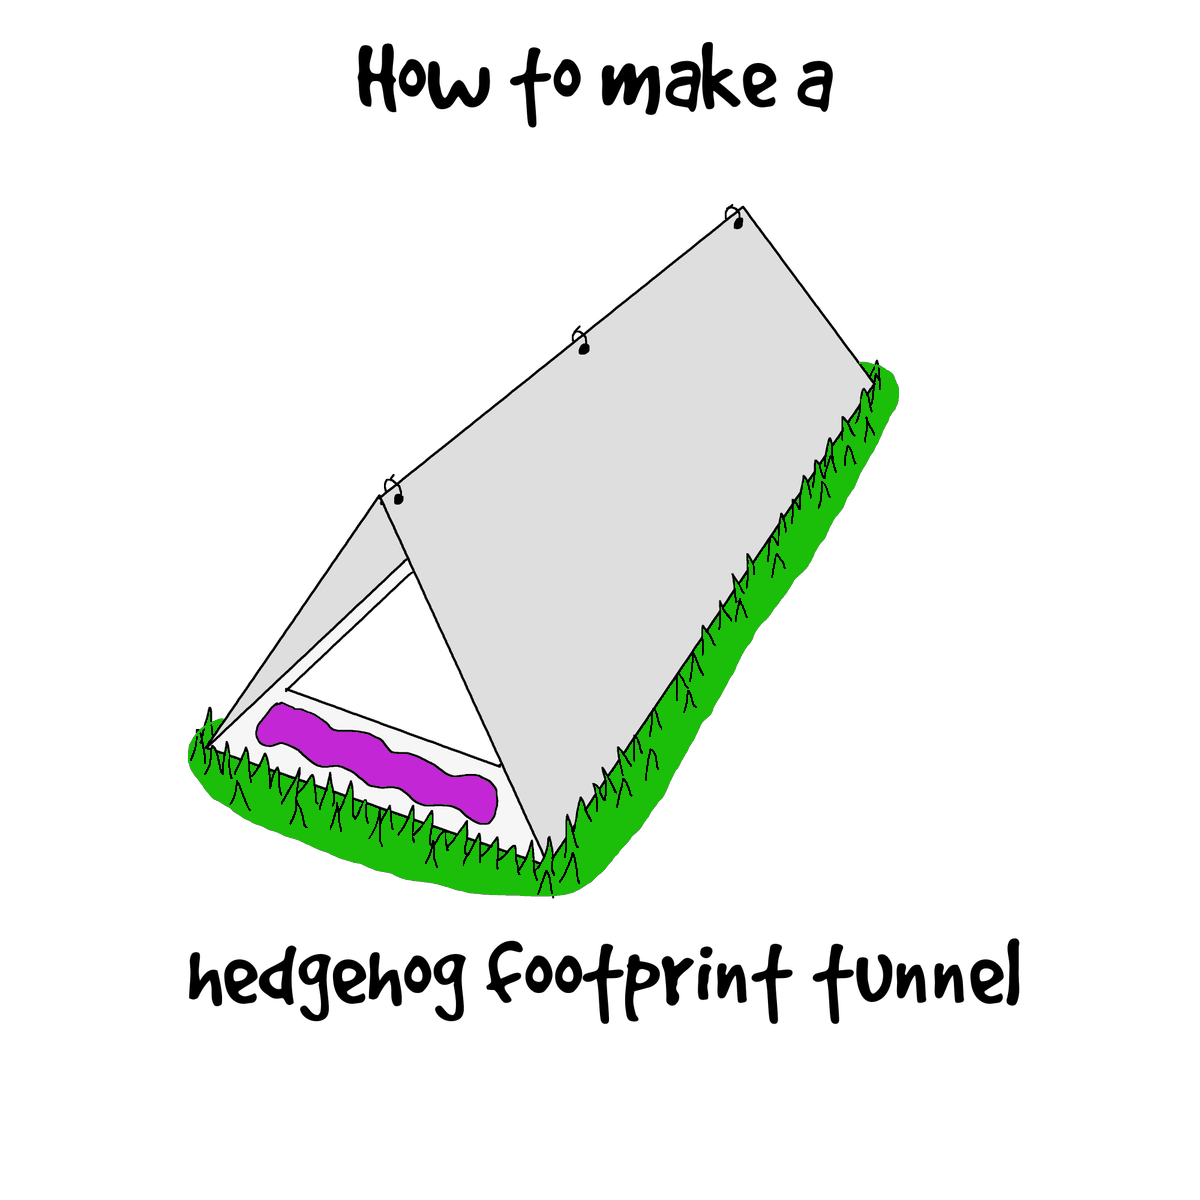 Here's our guide to making a hedgehog footprint tunnel at home... (thread)  @HogFriendly  @derbyunistudent  @derby_parks  @PTES  @hedgehogsociety